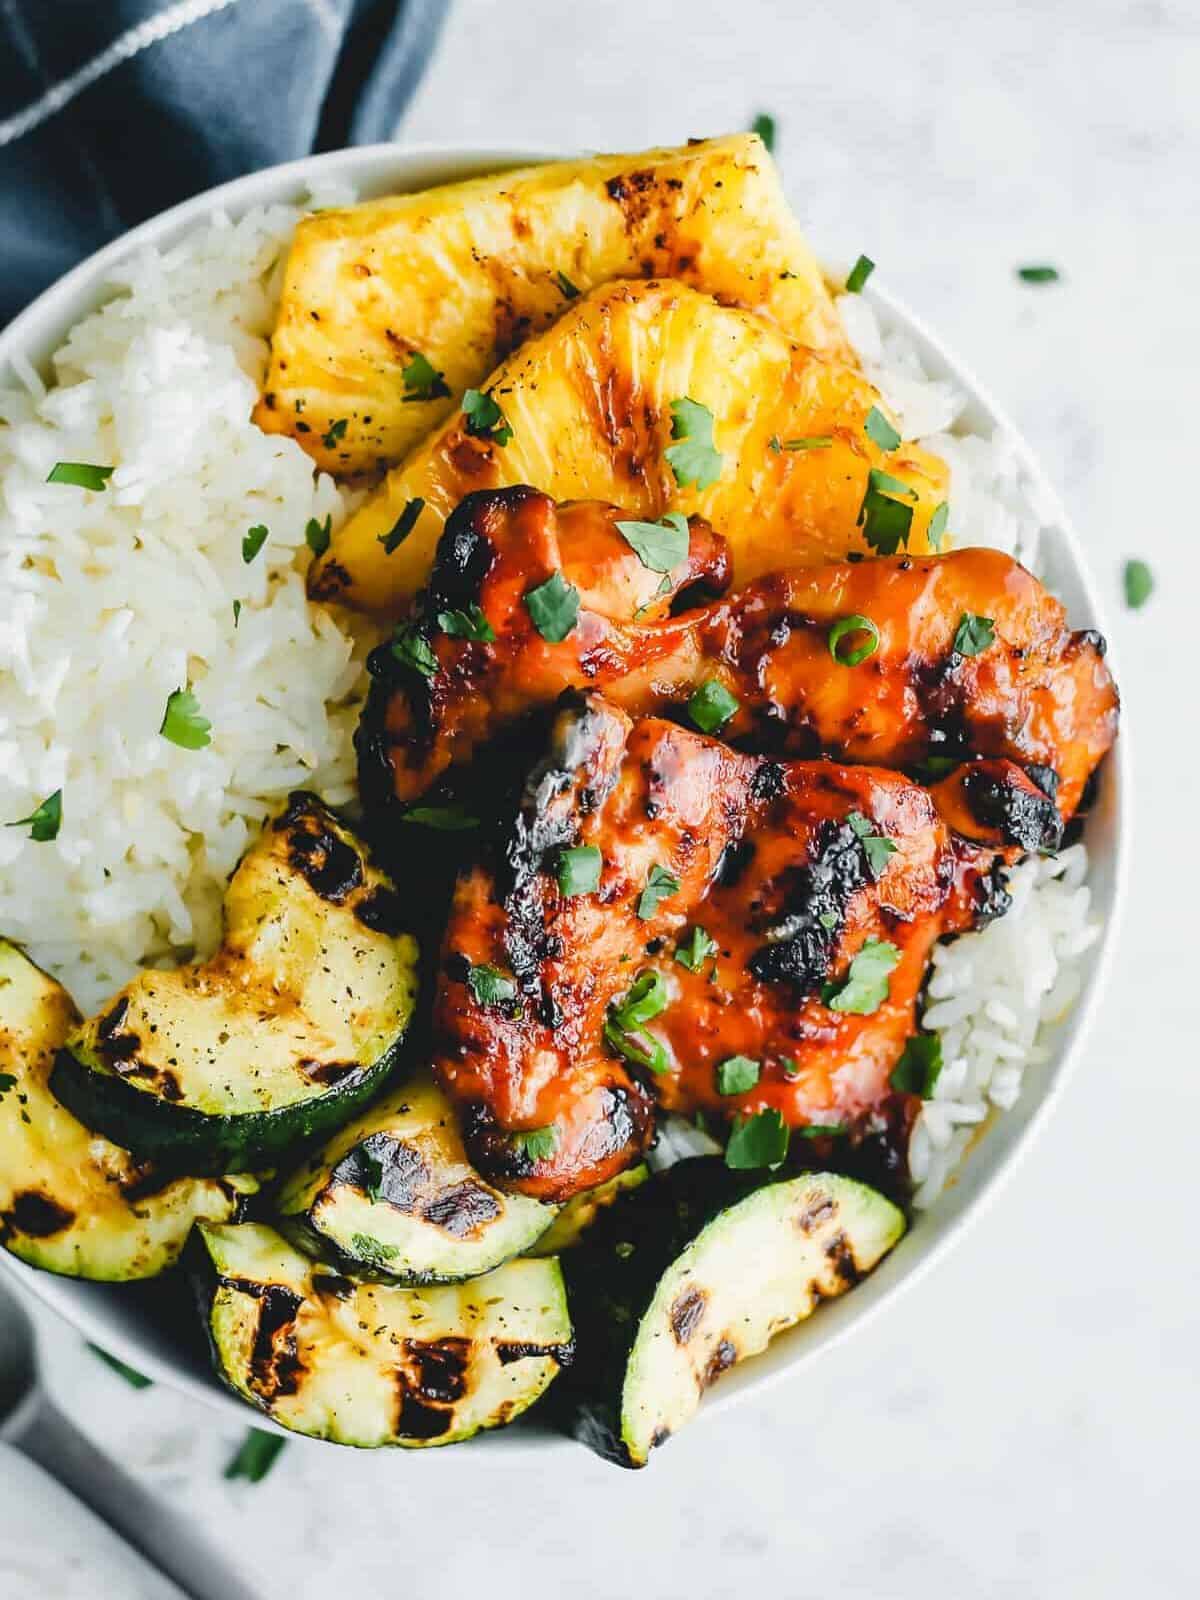 grilled huli huli chicken with pineapple and veggies on plate of rice